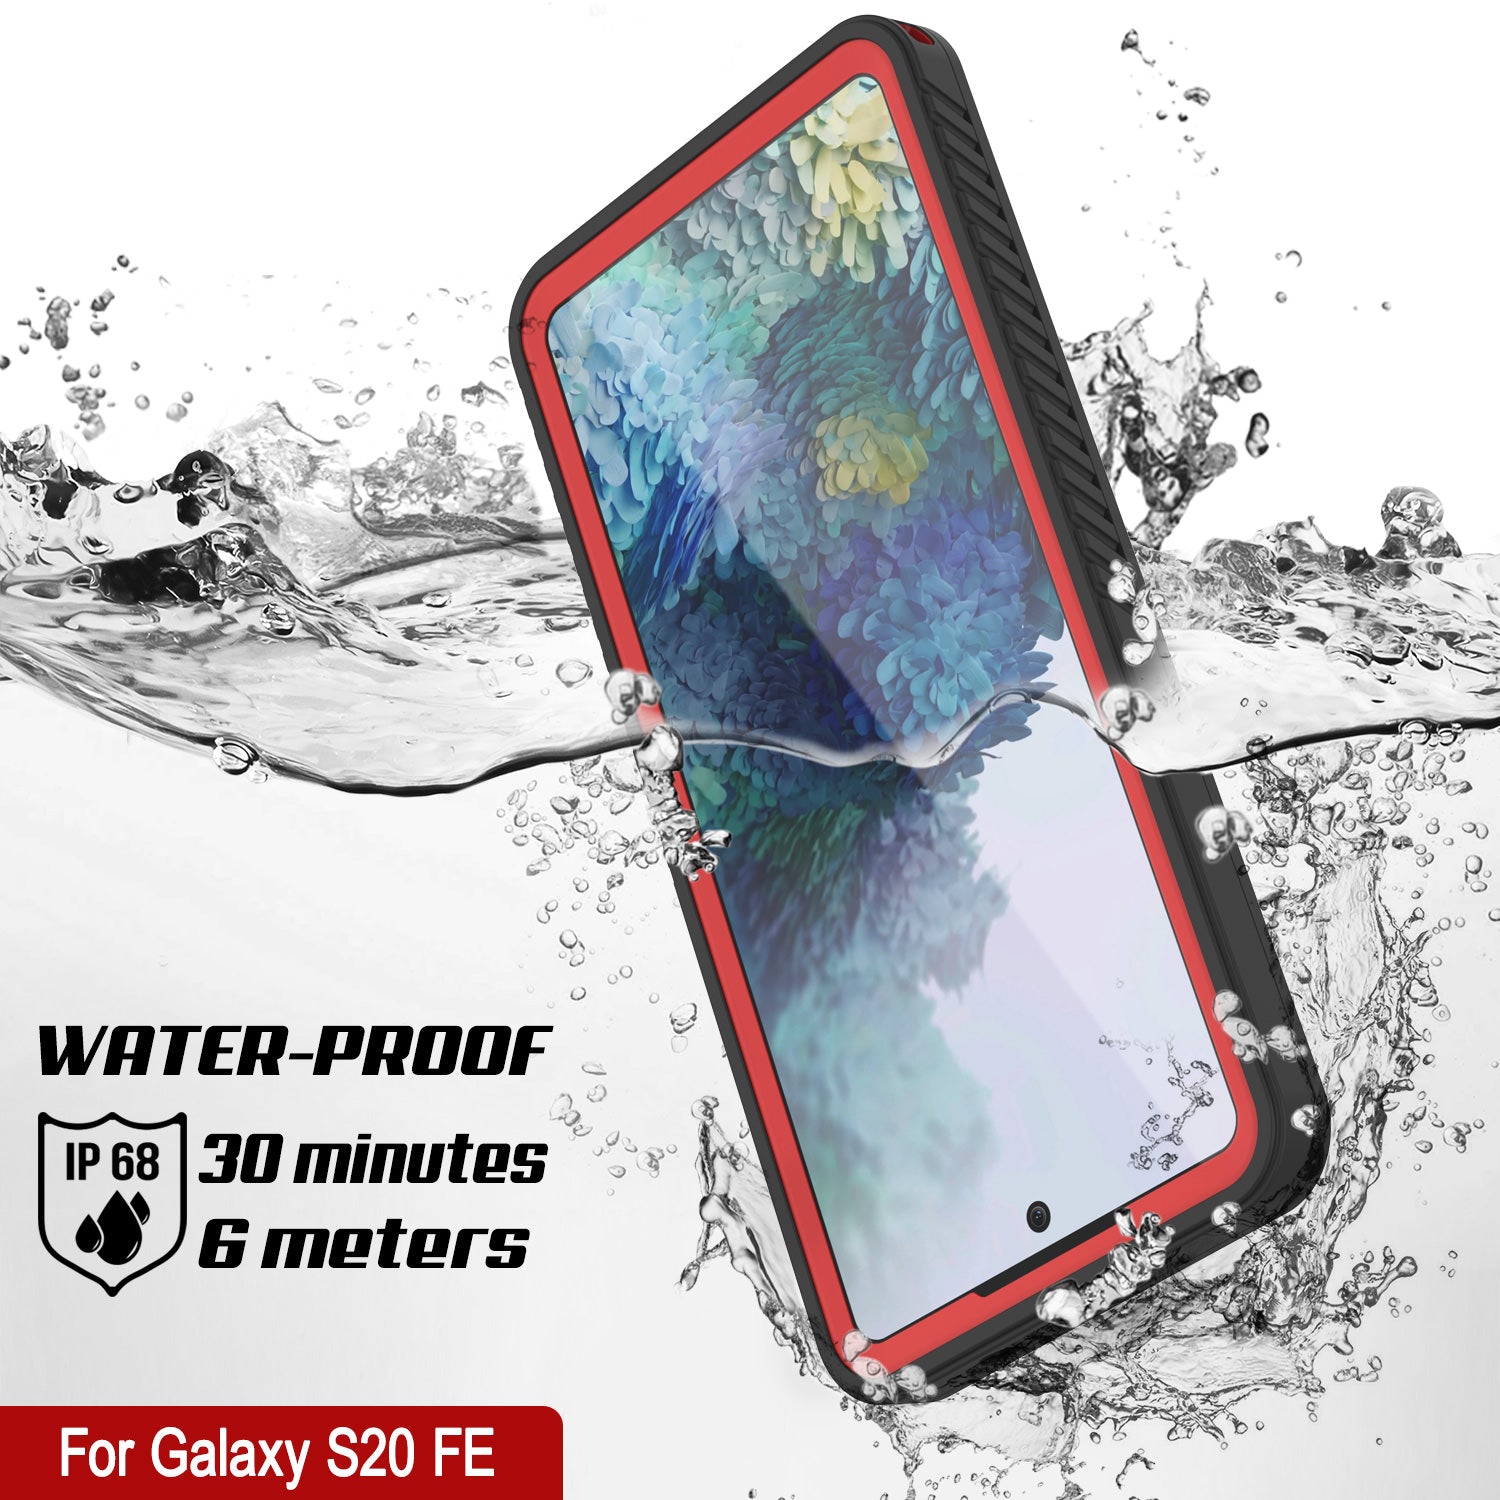 Samsung Galaxy S20 FE - Waterproof and shockproof case